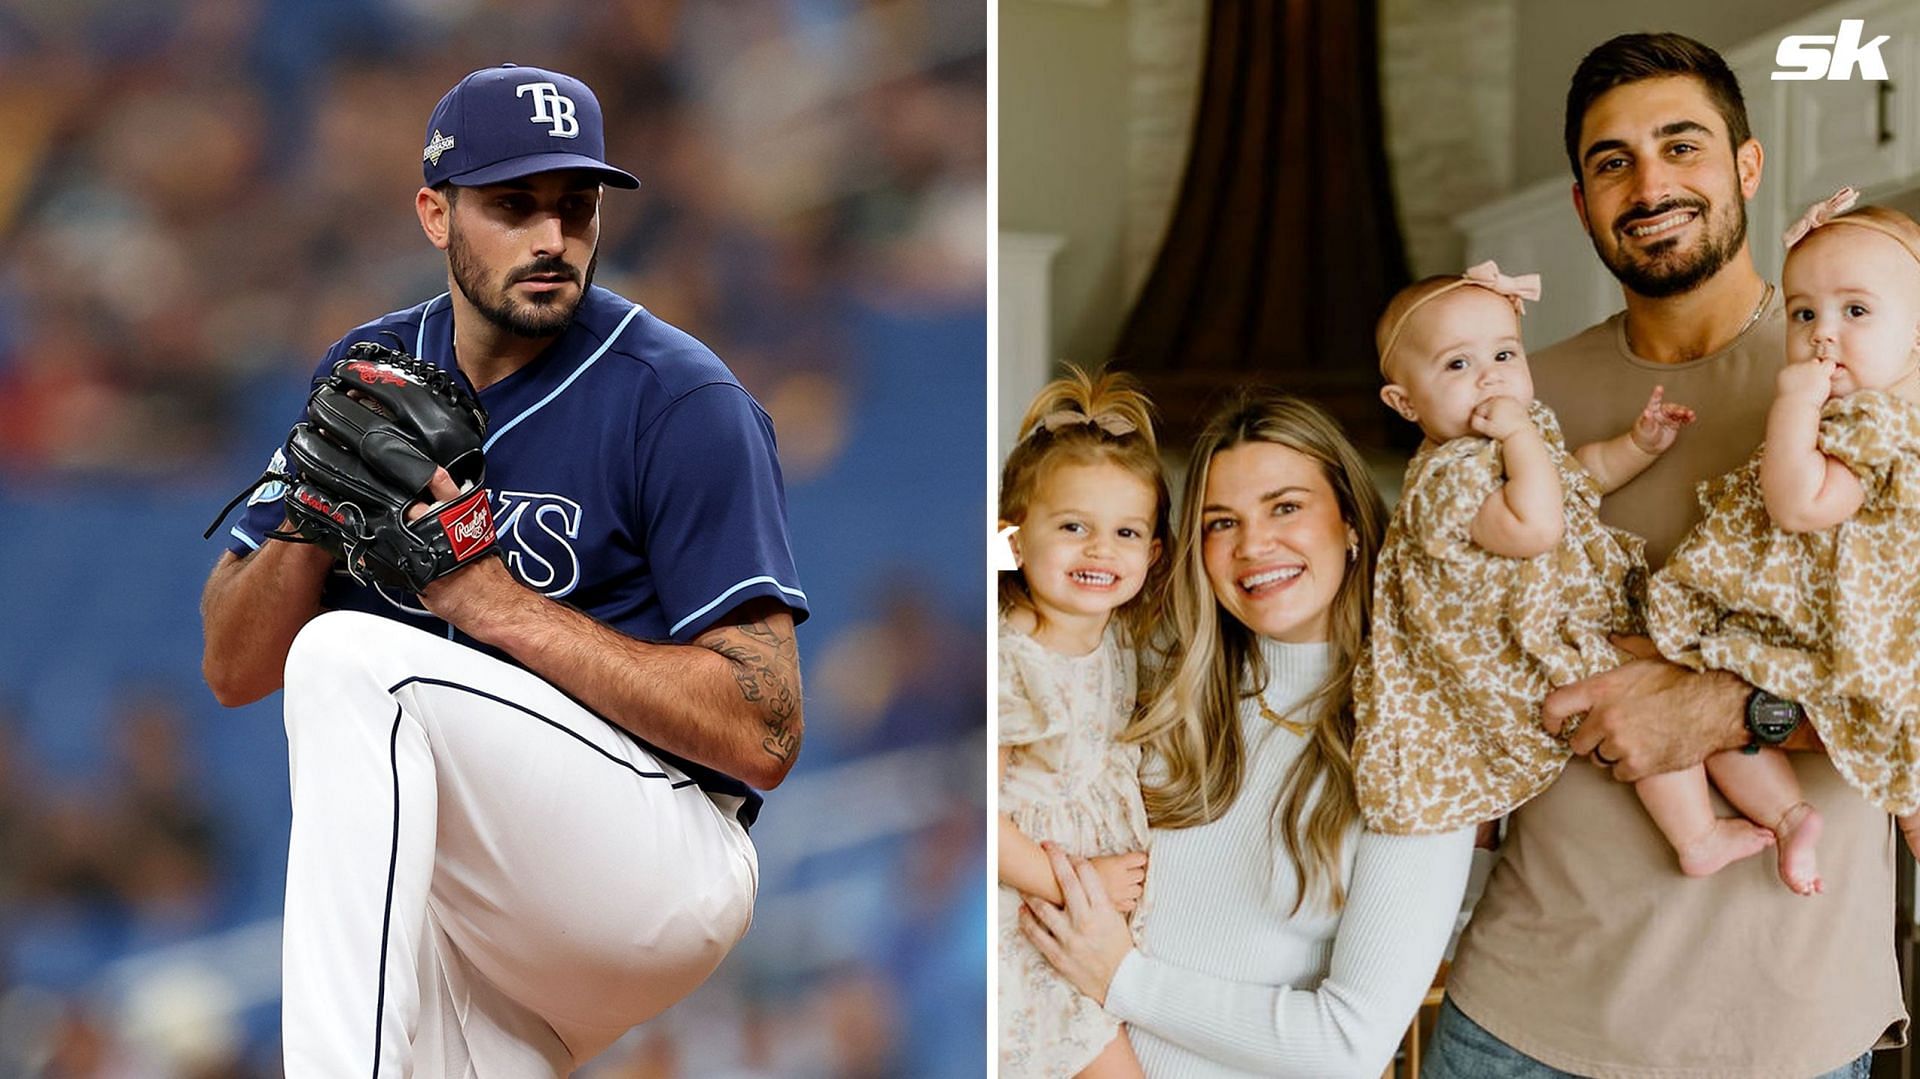 Zach Eflin poses for a family photo with wife and children